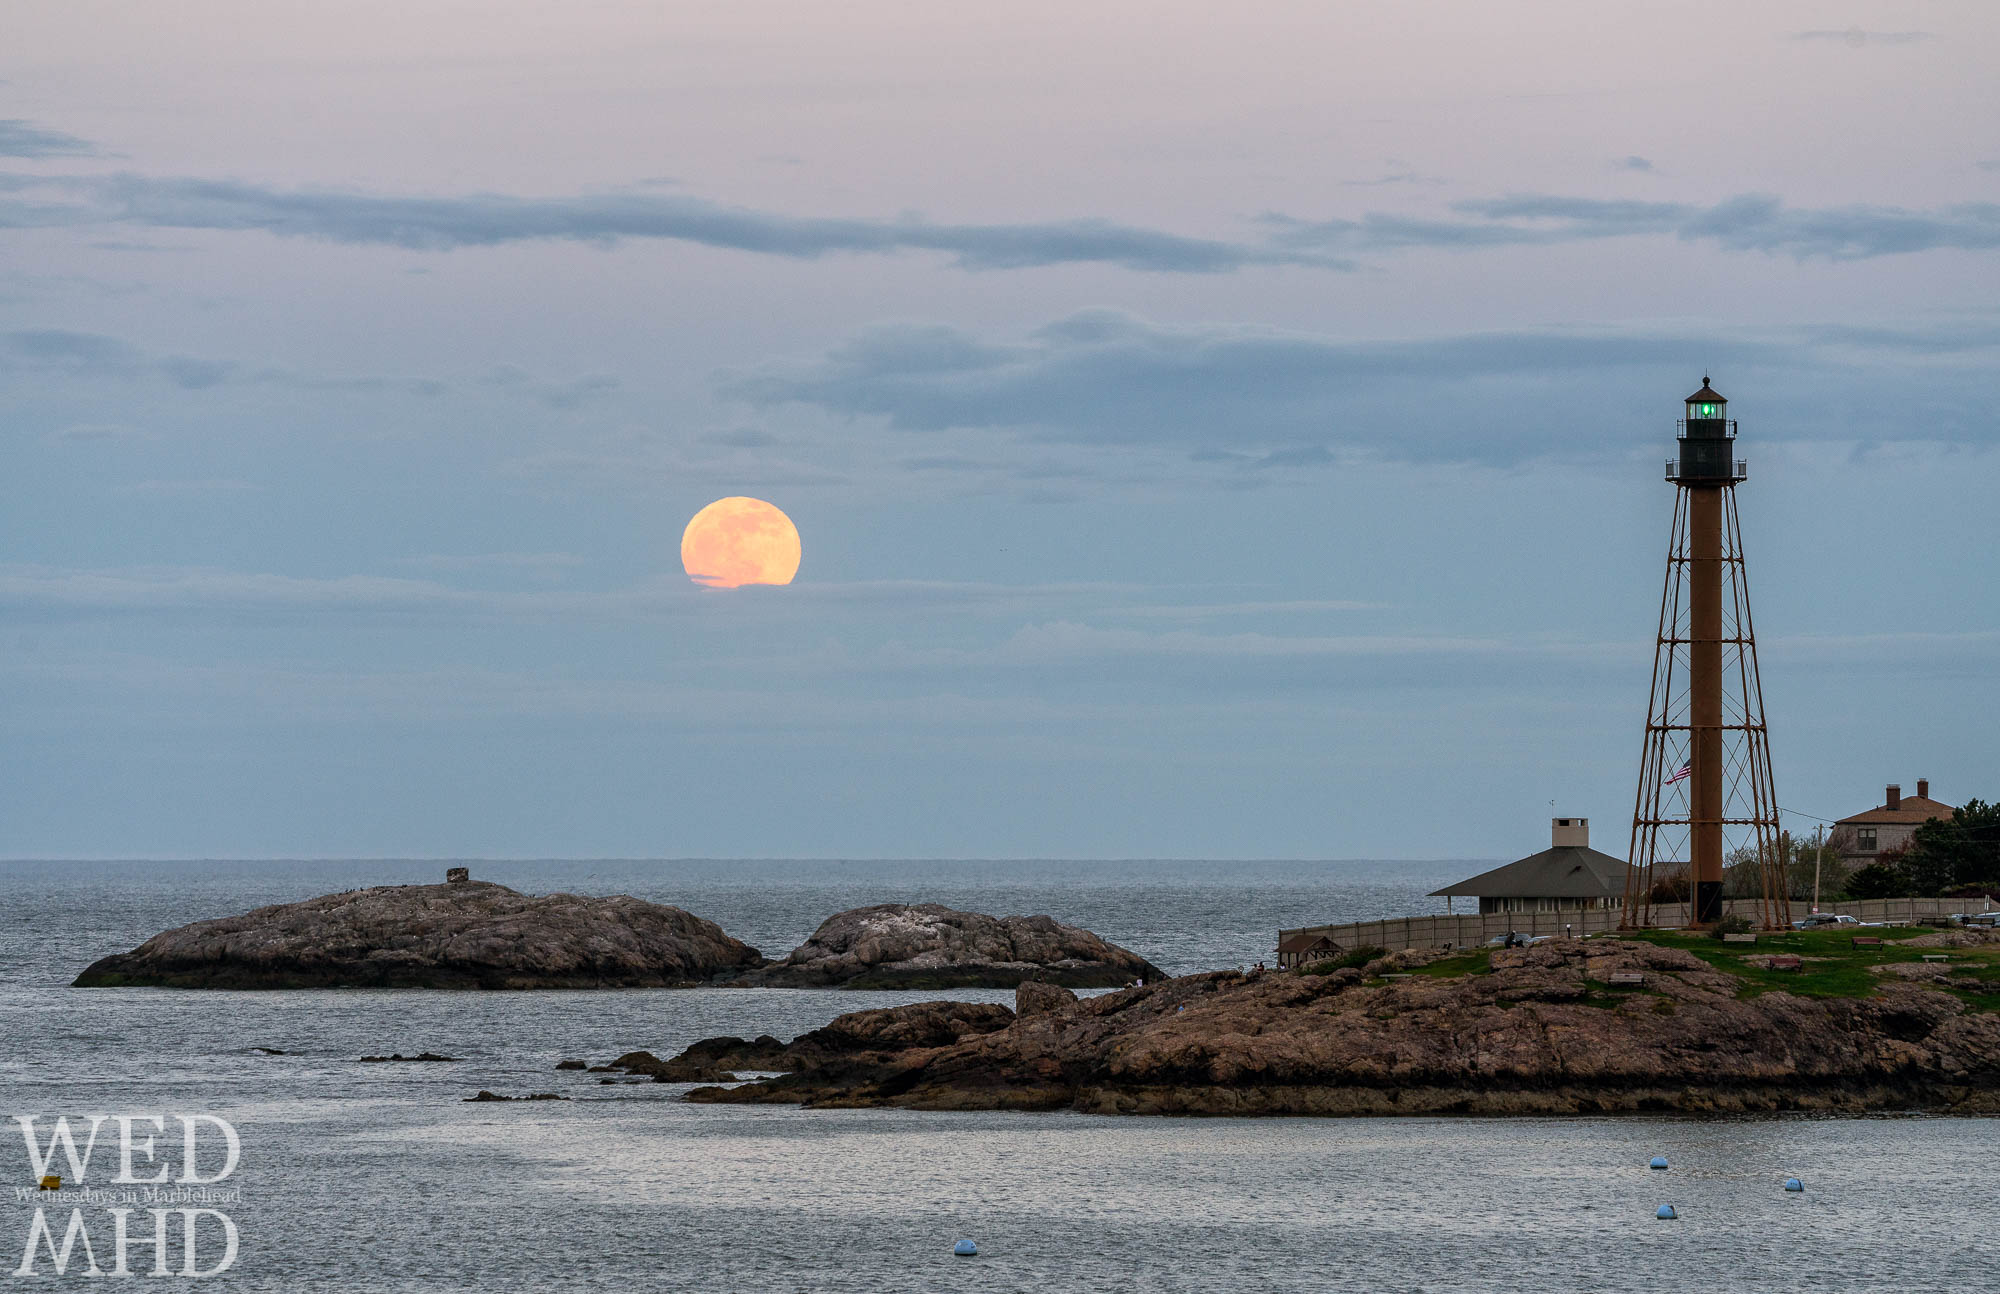 The full moon rises above the clouds at Chandler Hovey Park with Marblehead Light standing tall